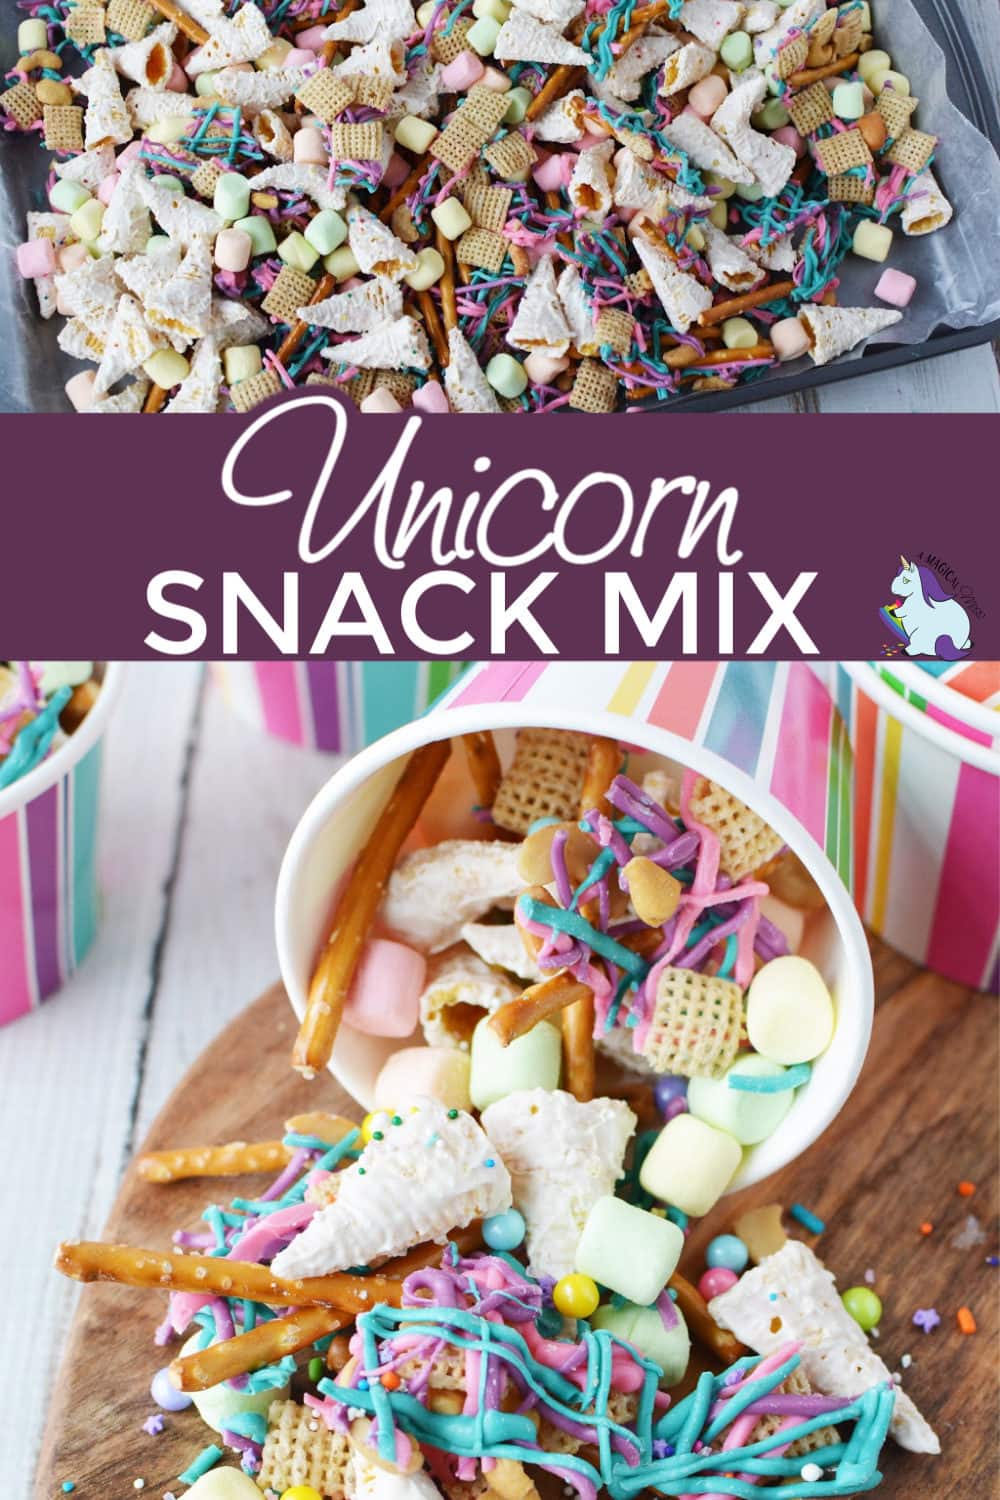 unicorn snack mix spilling out of striped paper cup